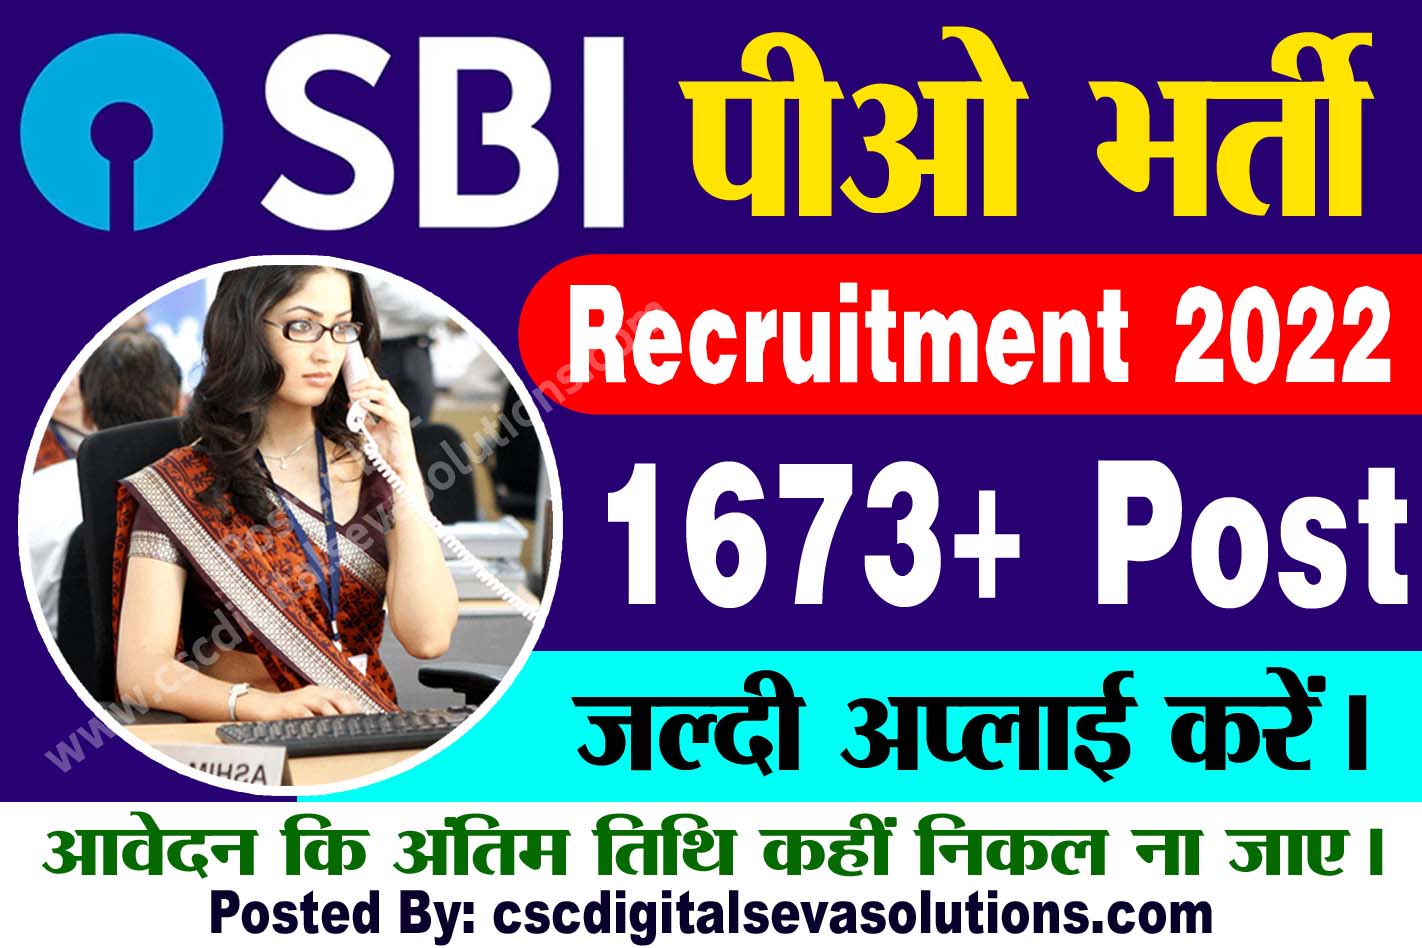 SBI PO Recruitment 2022 Started: Apply Online, Eligibility, Last Date